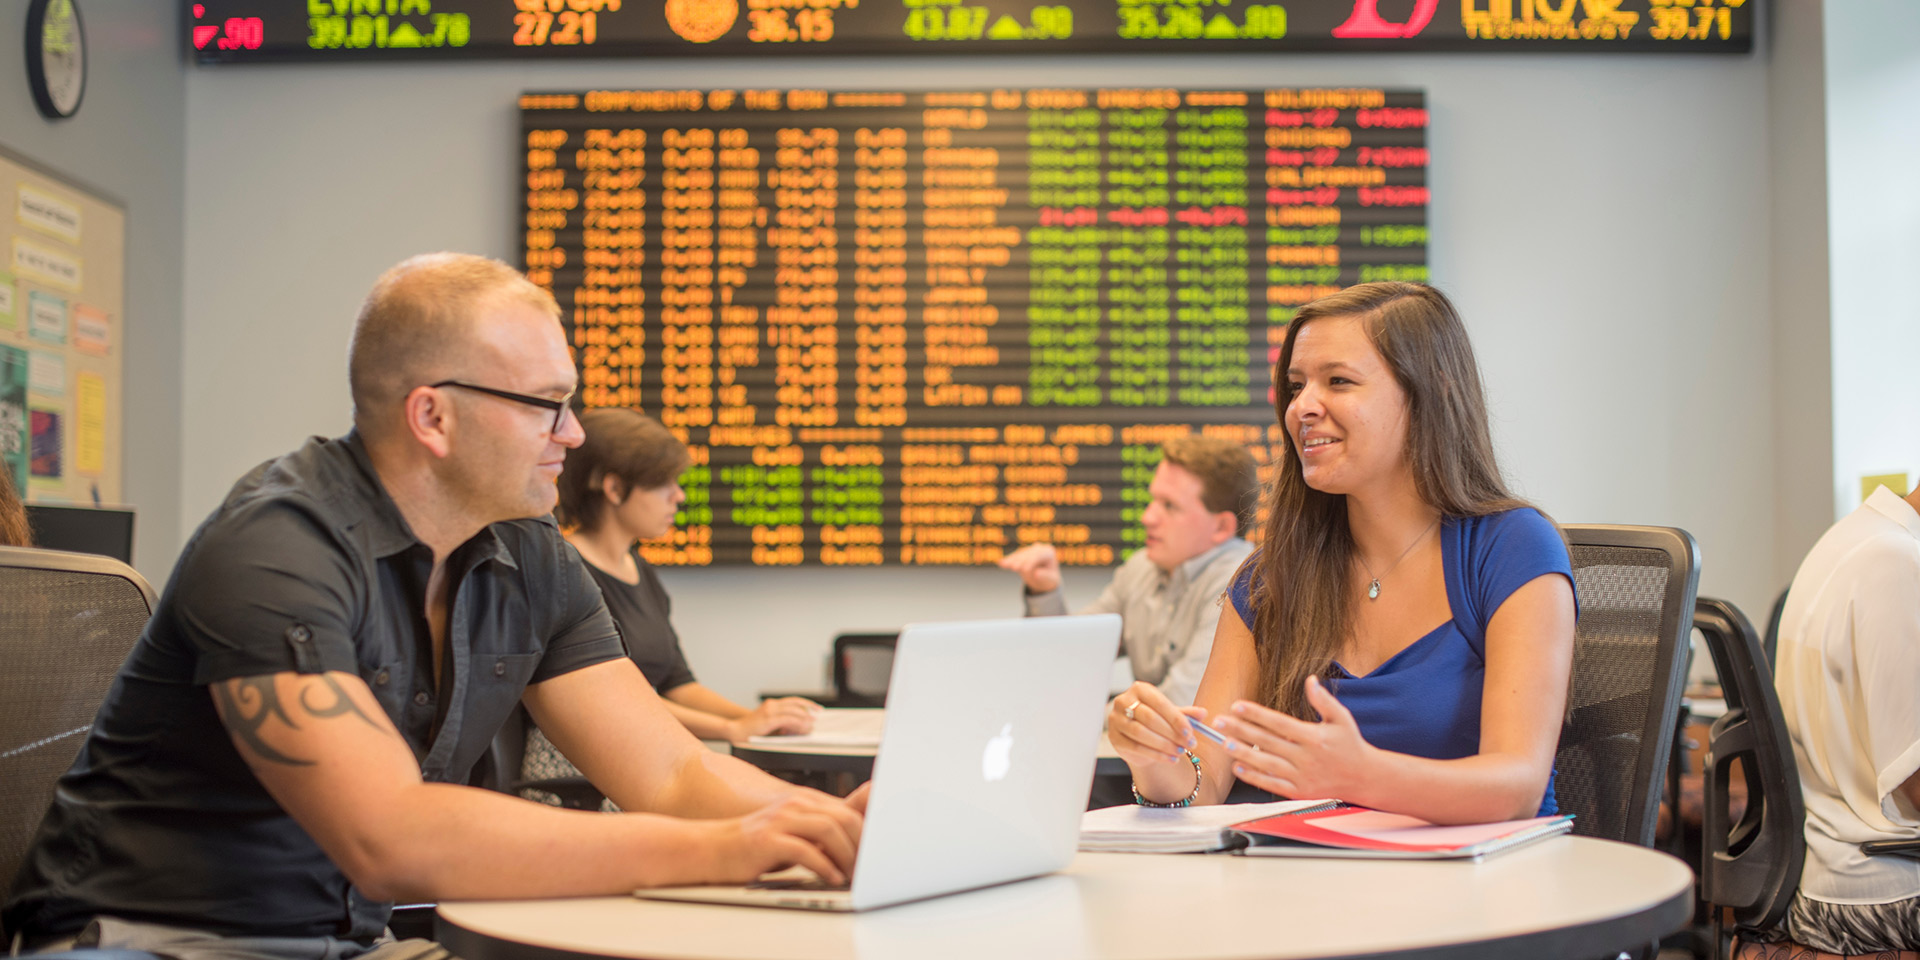 Two students talk at a table in front of a large stock ticker board